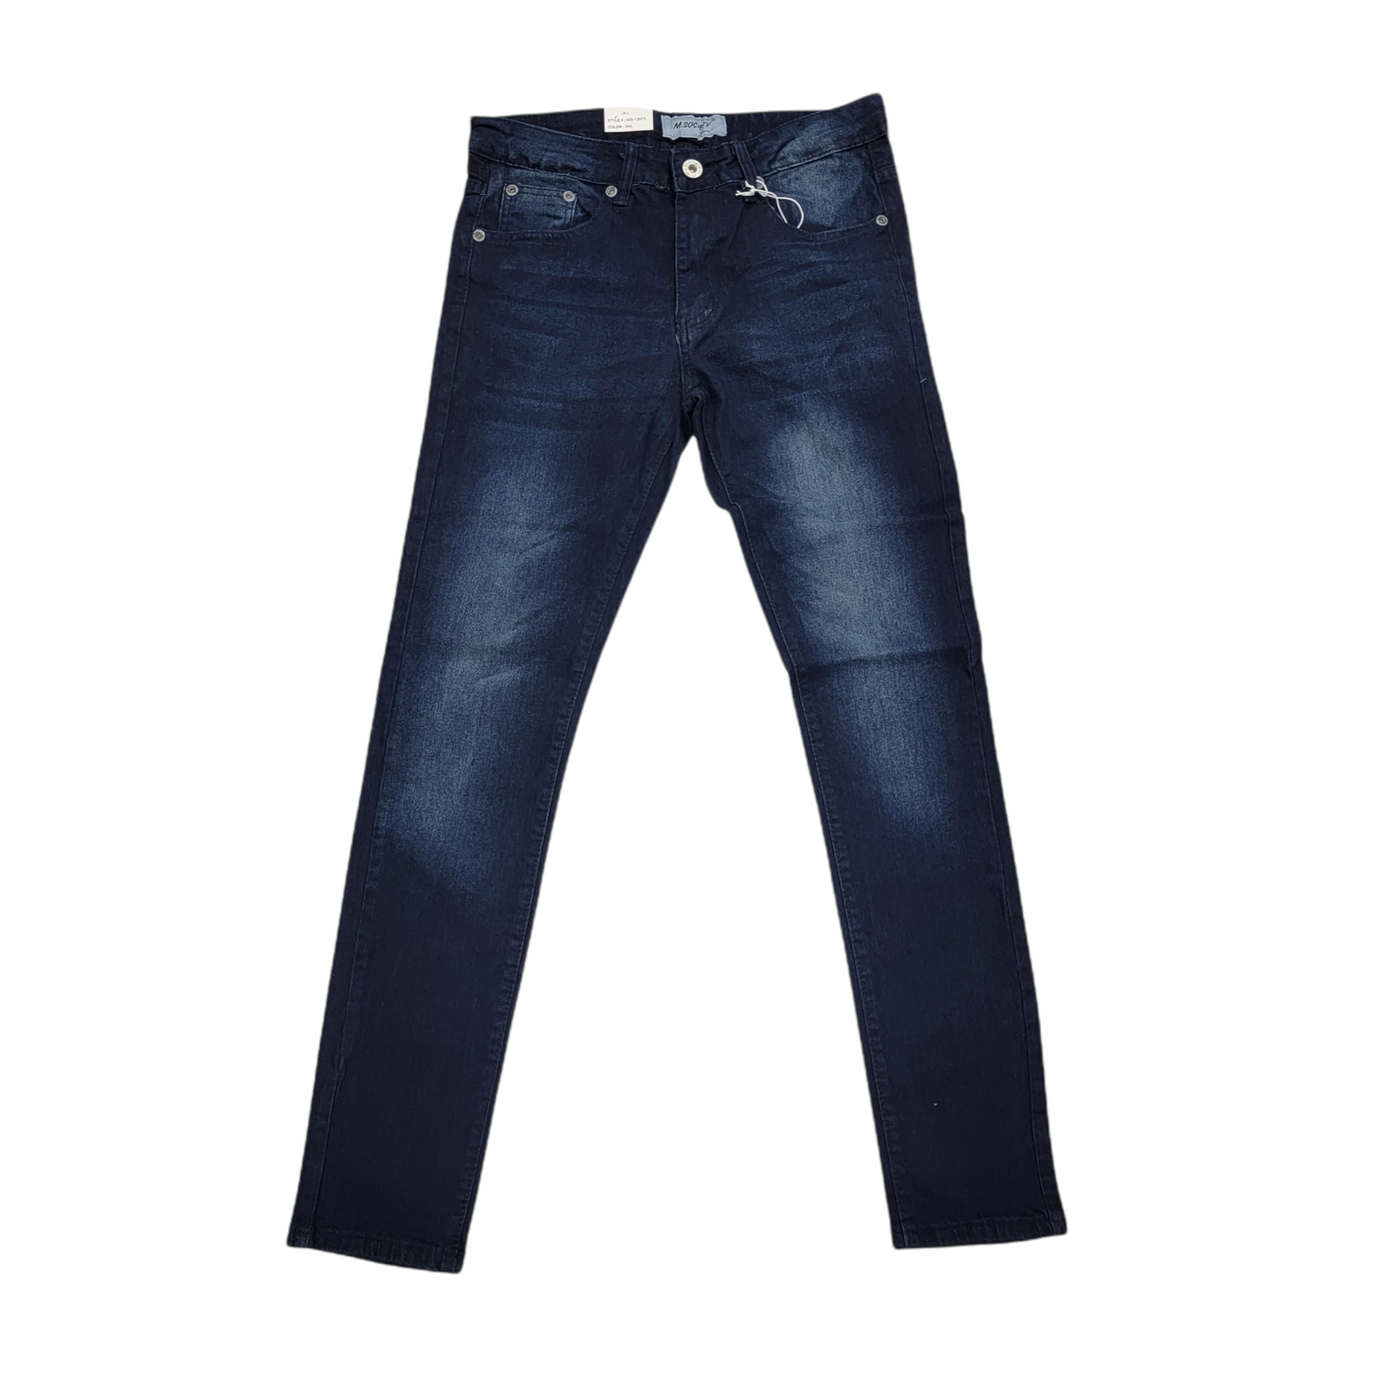 M. Society Navy Cement wash Jeans Plain